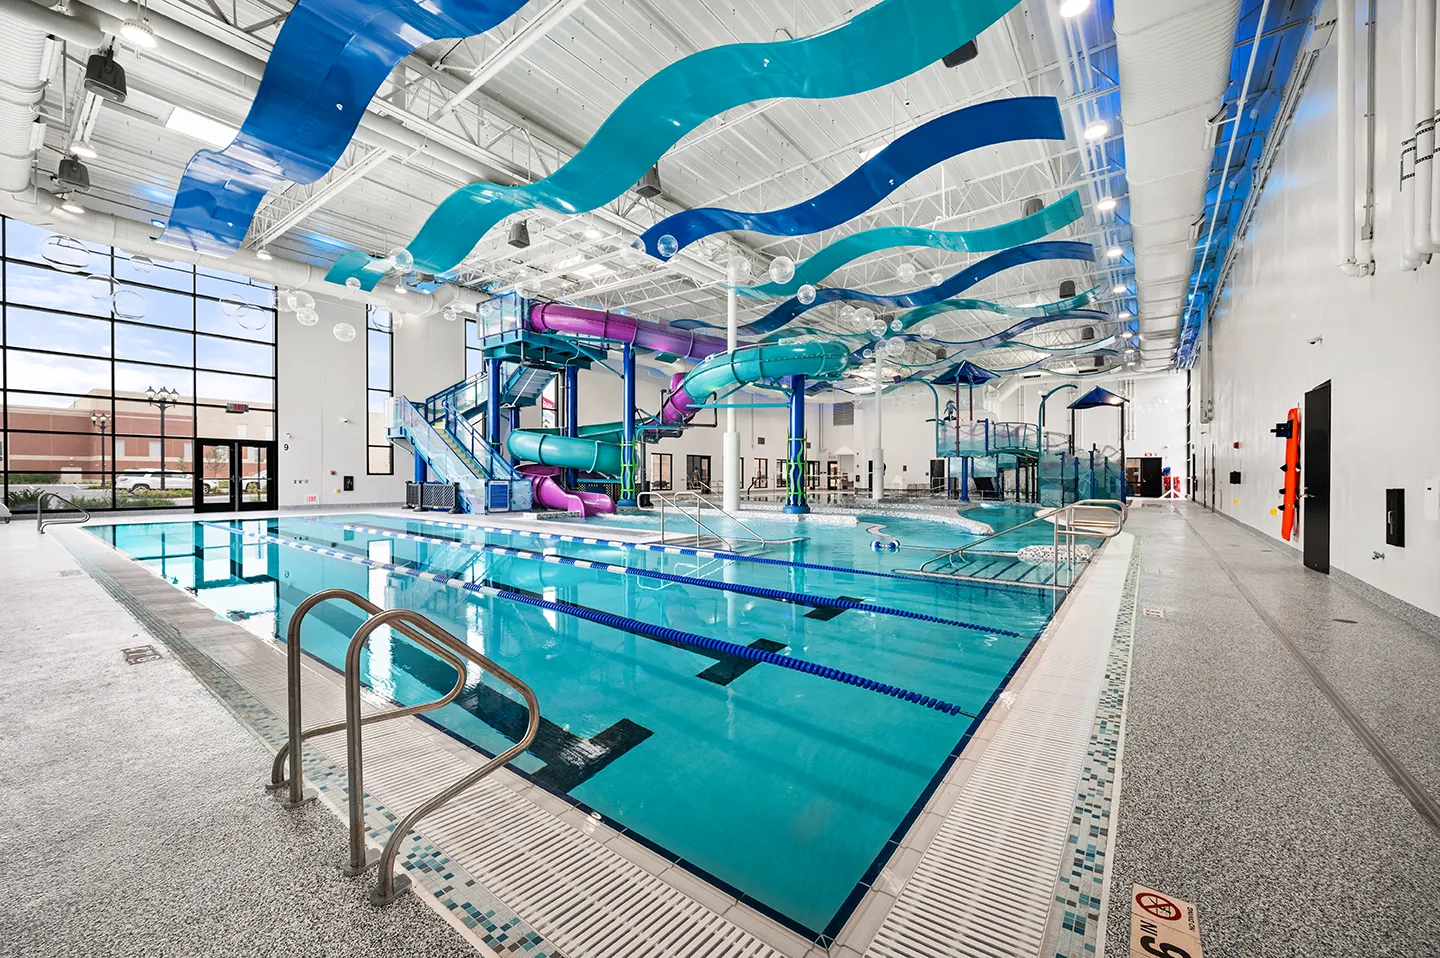 Three 20-yard lap lanes and an underwater-themed indoor waterpark were designed into the facility.